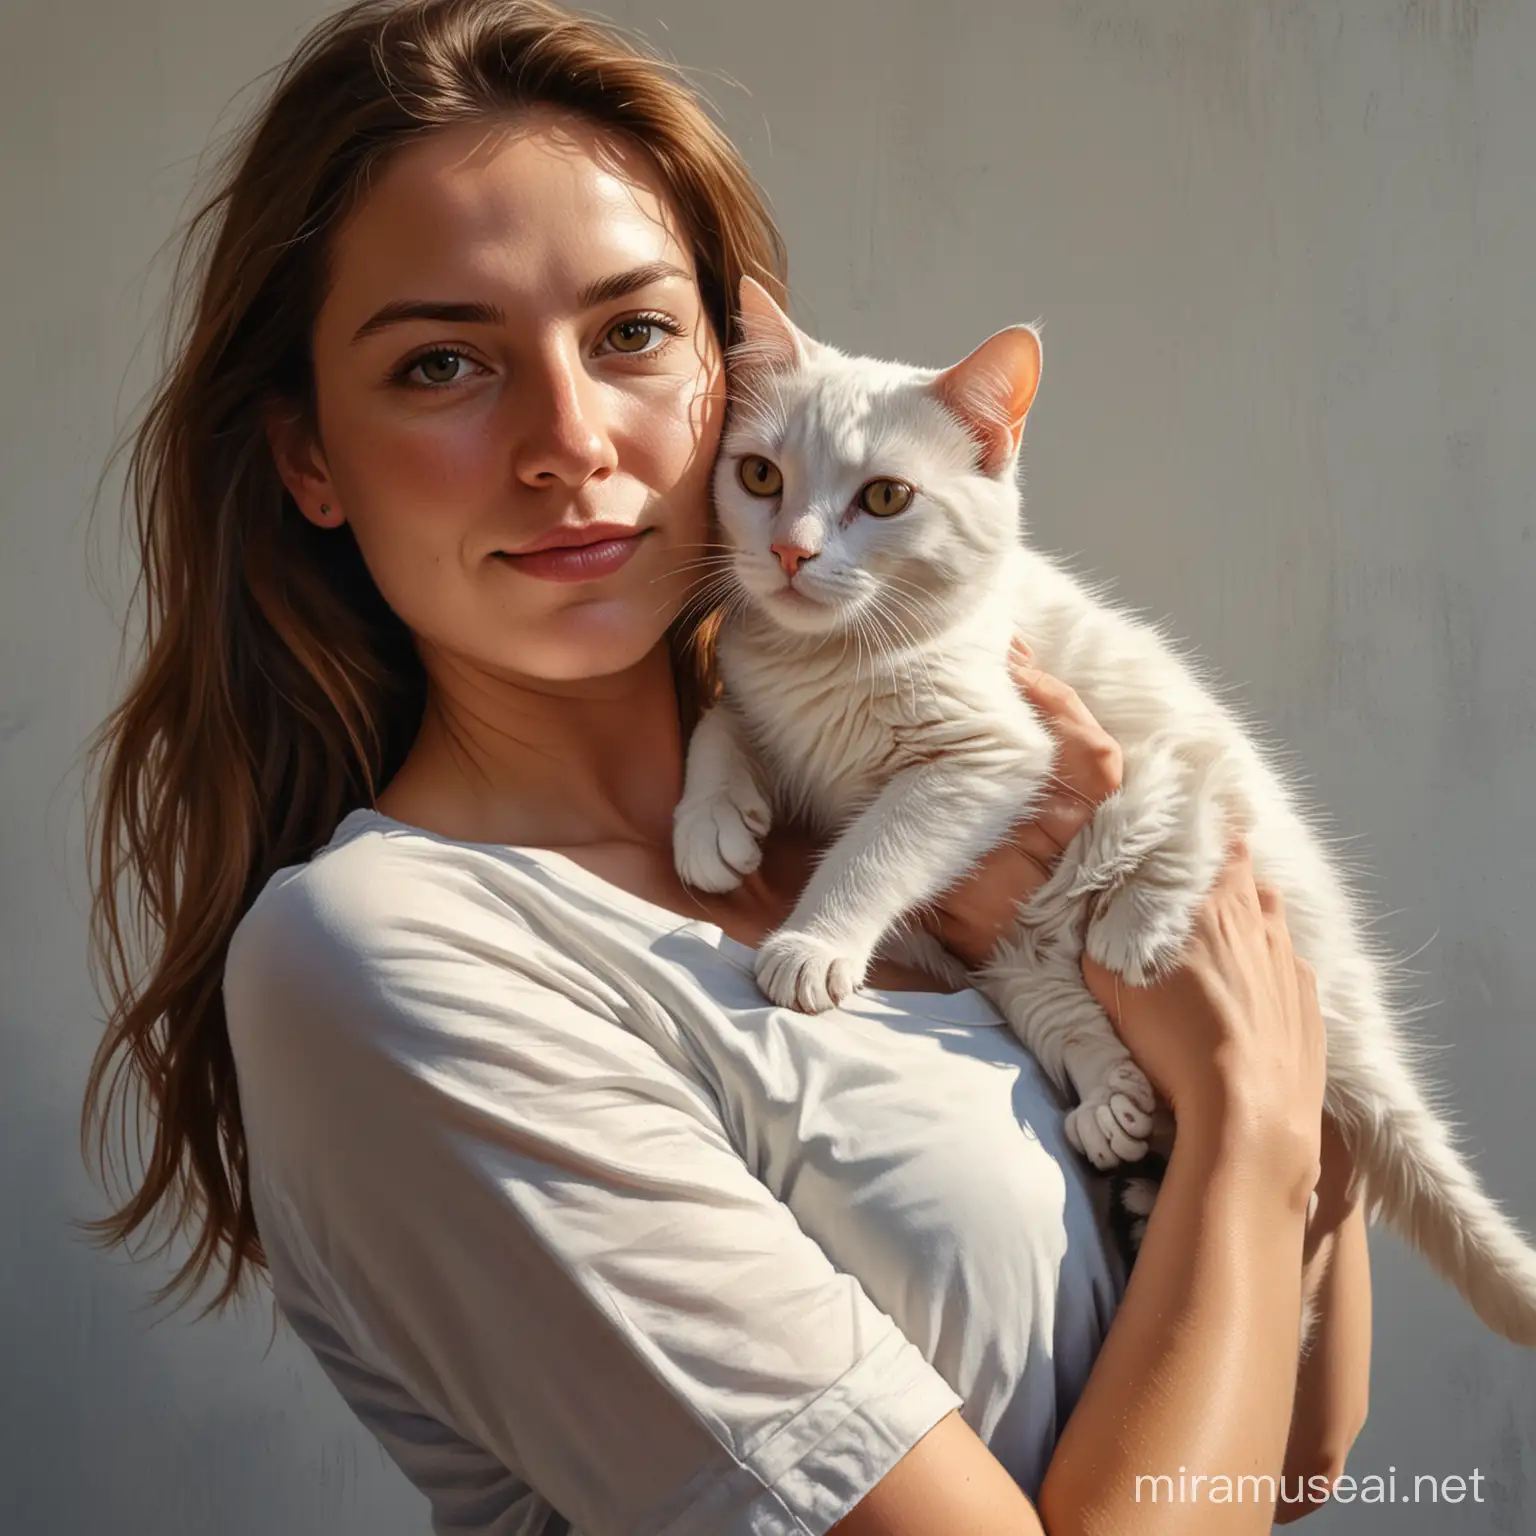 Oil Painting of Woman with Cat on Her Arm Displaying Warmth and Serenity